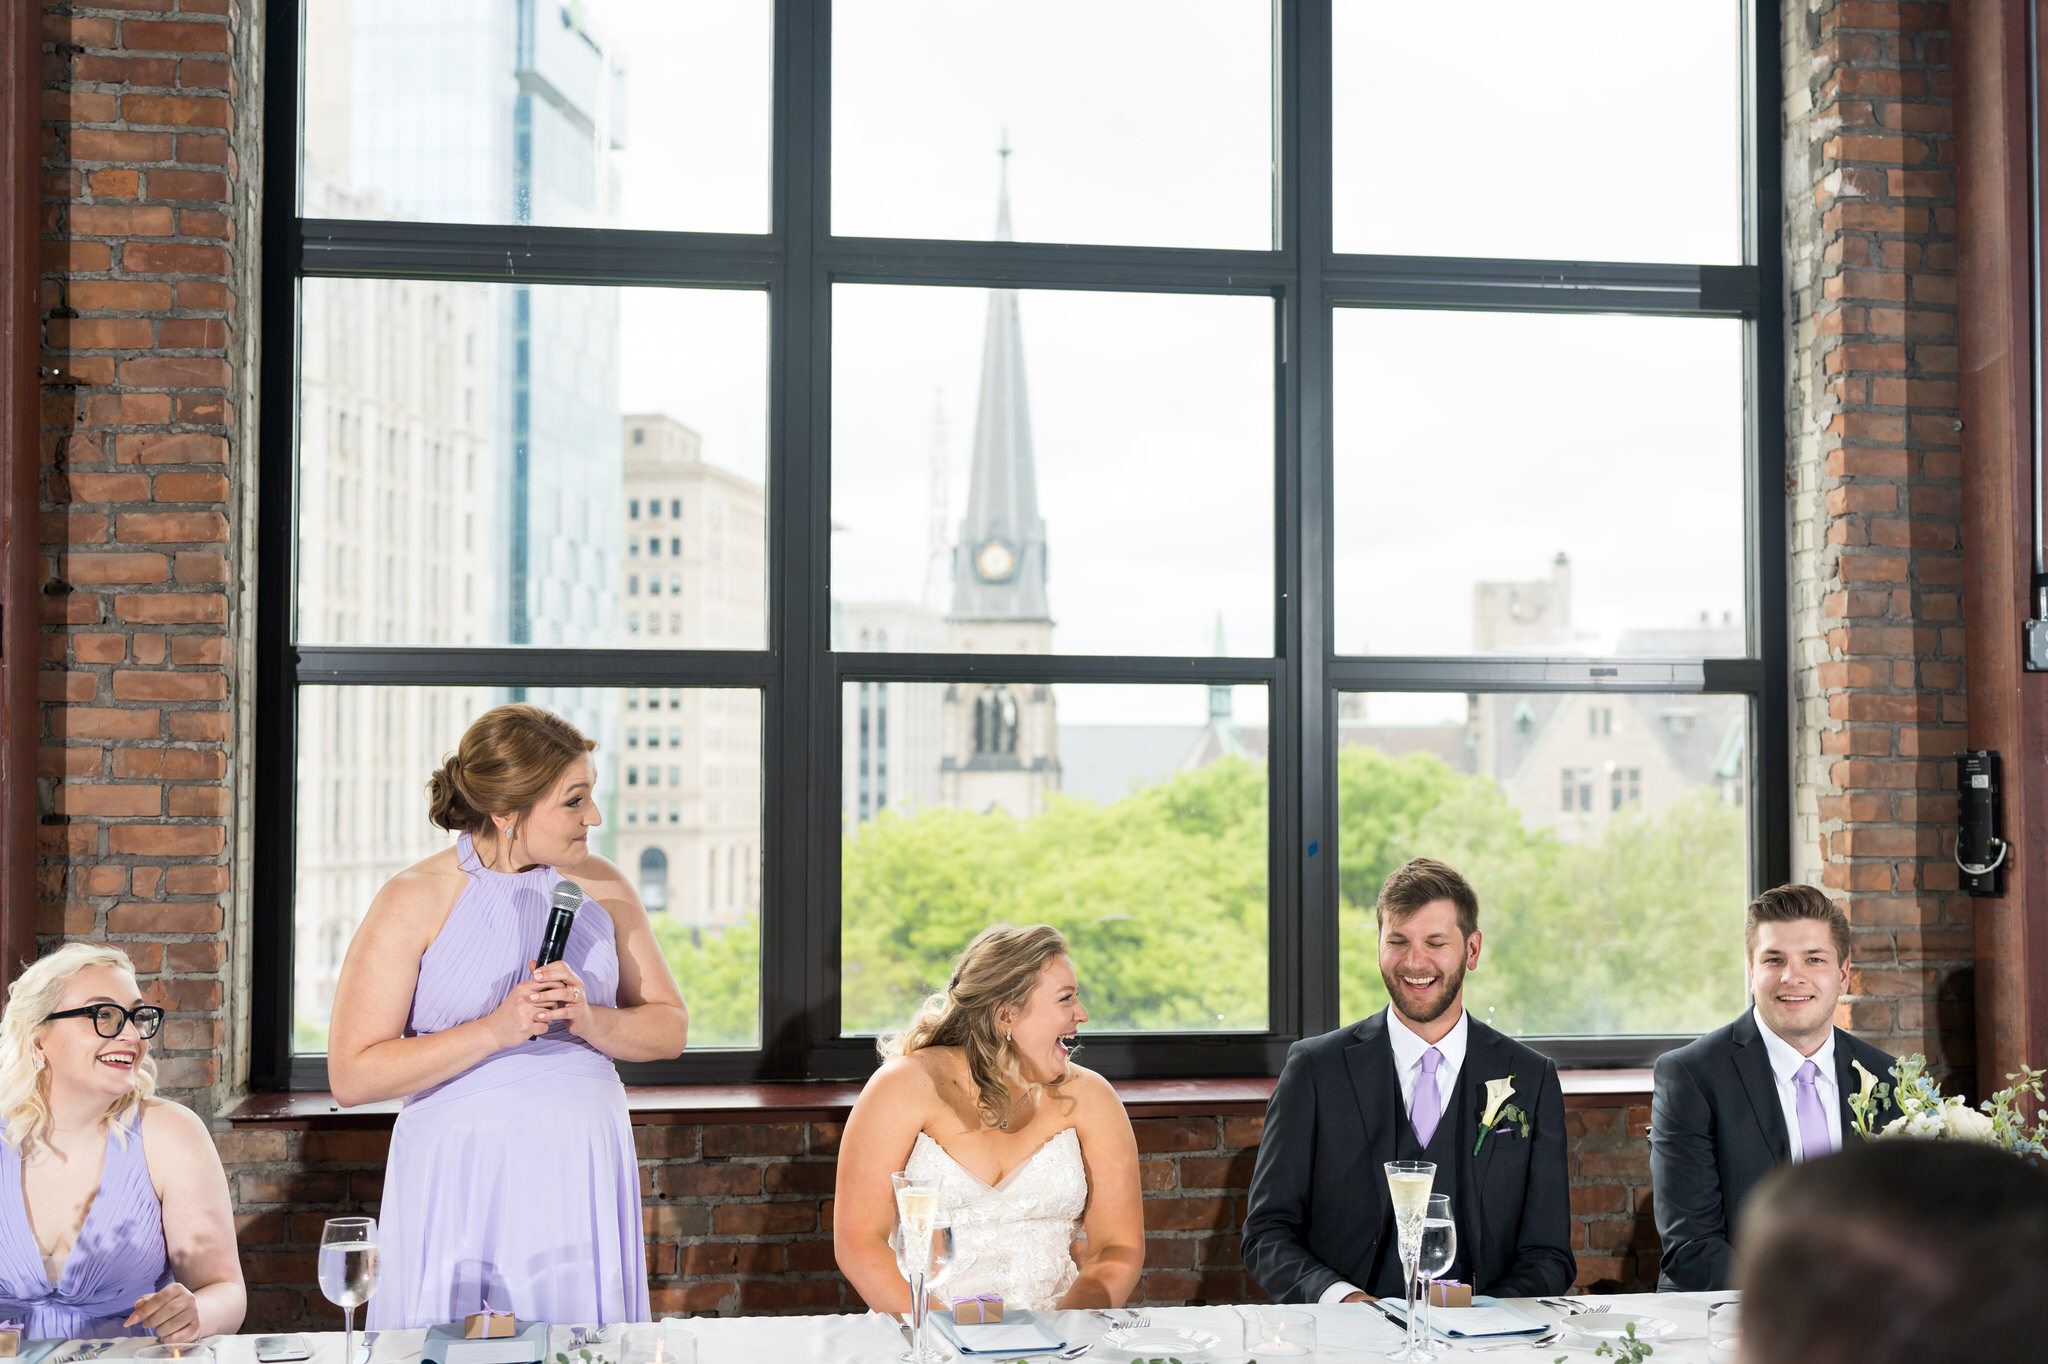 The Maid of Honor delivers a funny speech at a Madison Building wedding reception. 